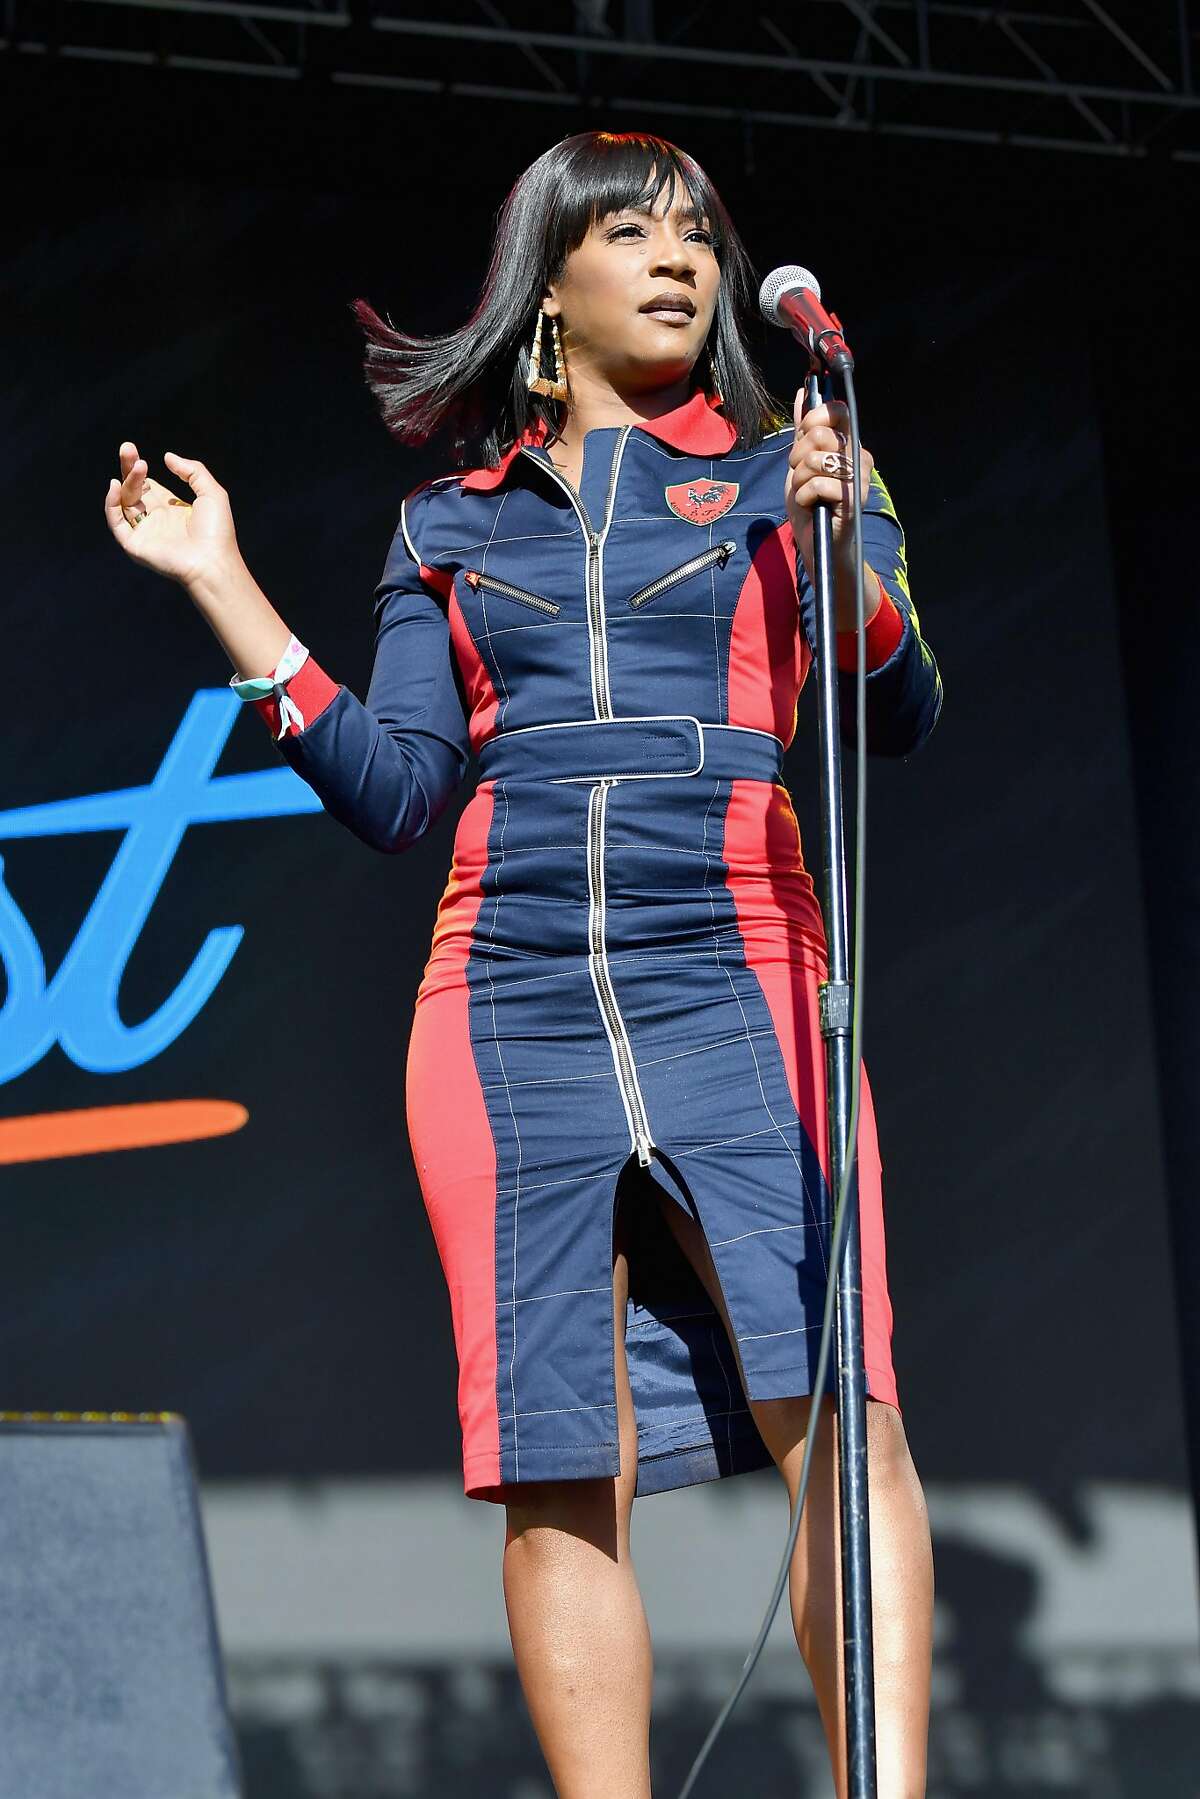 Tiffany Haddish performed a stand-up comedy set at Clusterfest on Saturday, June 2, in San Francisco.